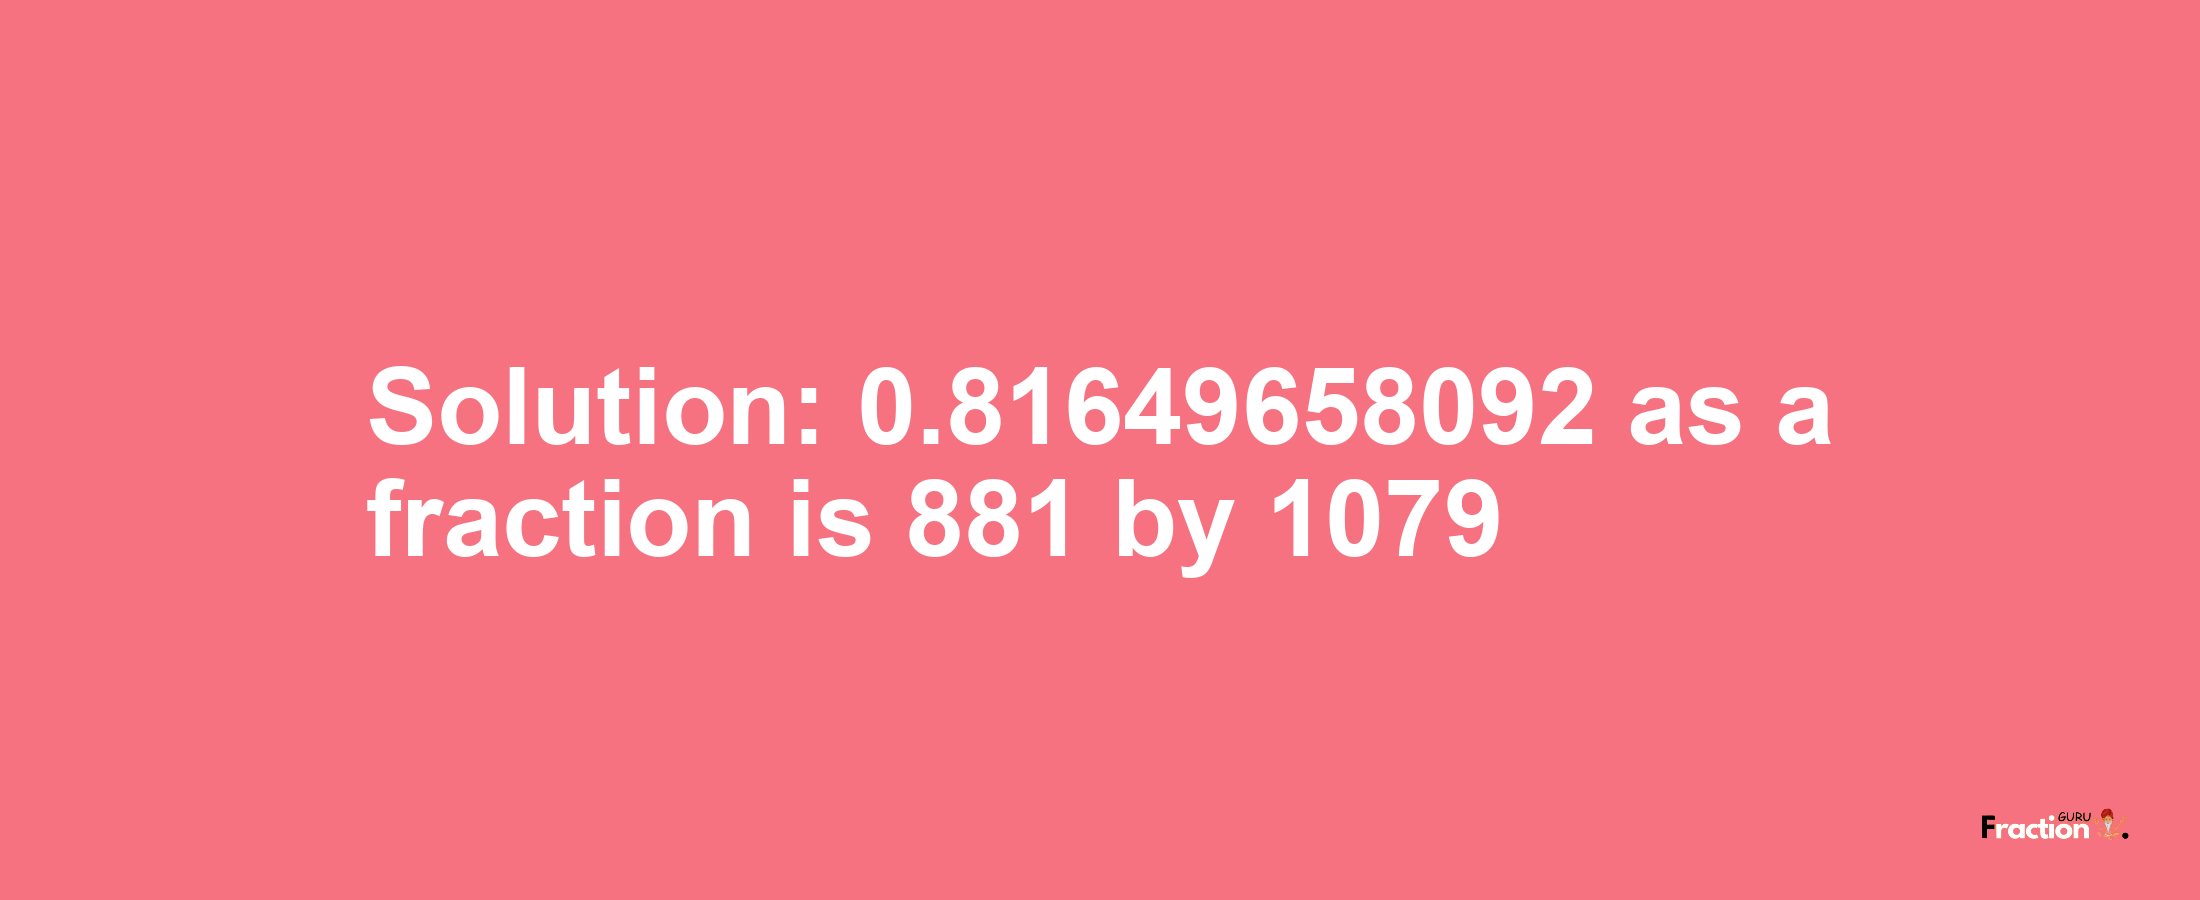 Solution:0.81649658092 as a fraction is 881/1079